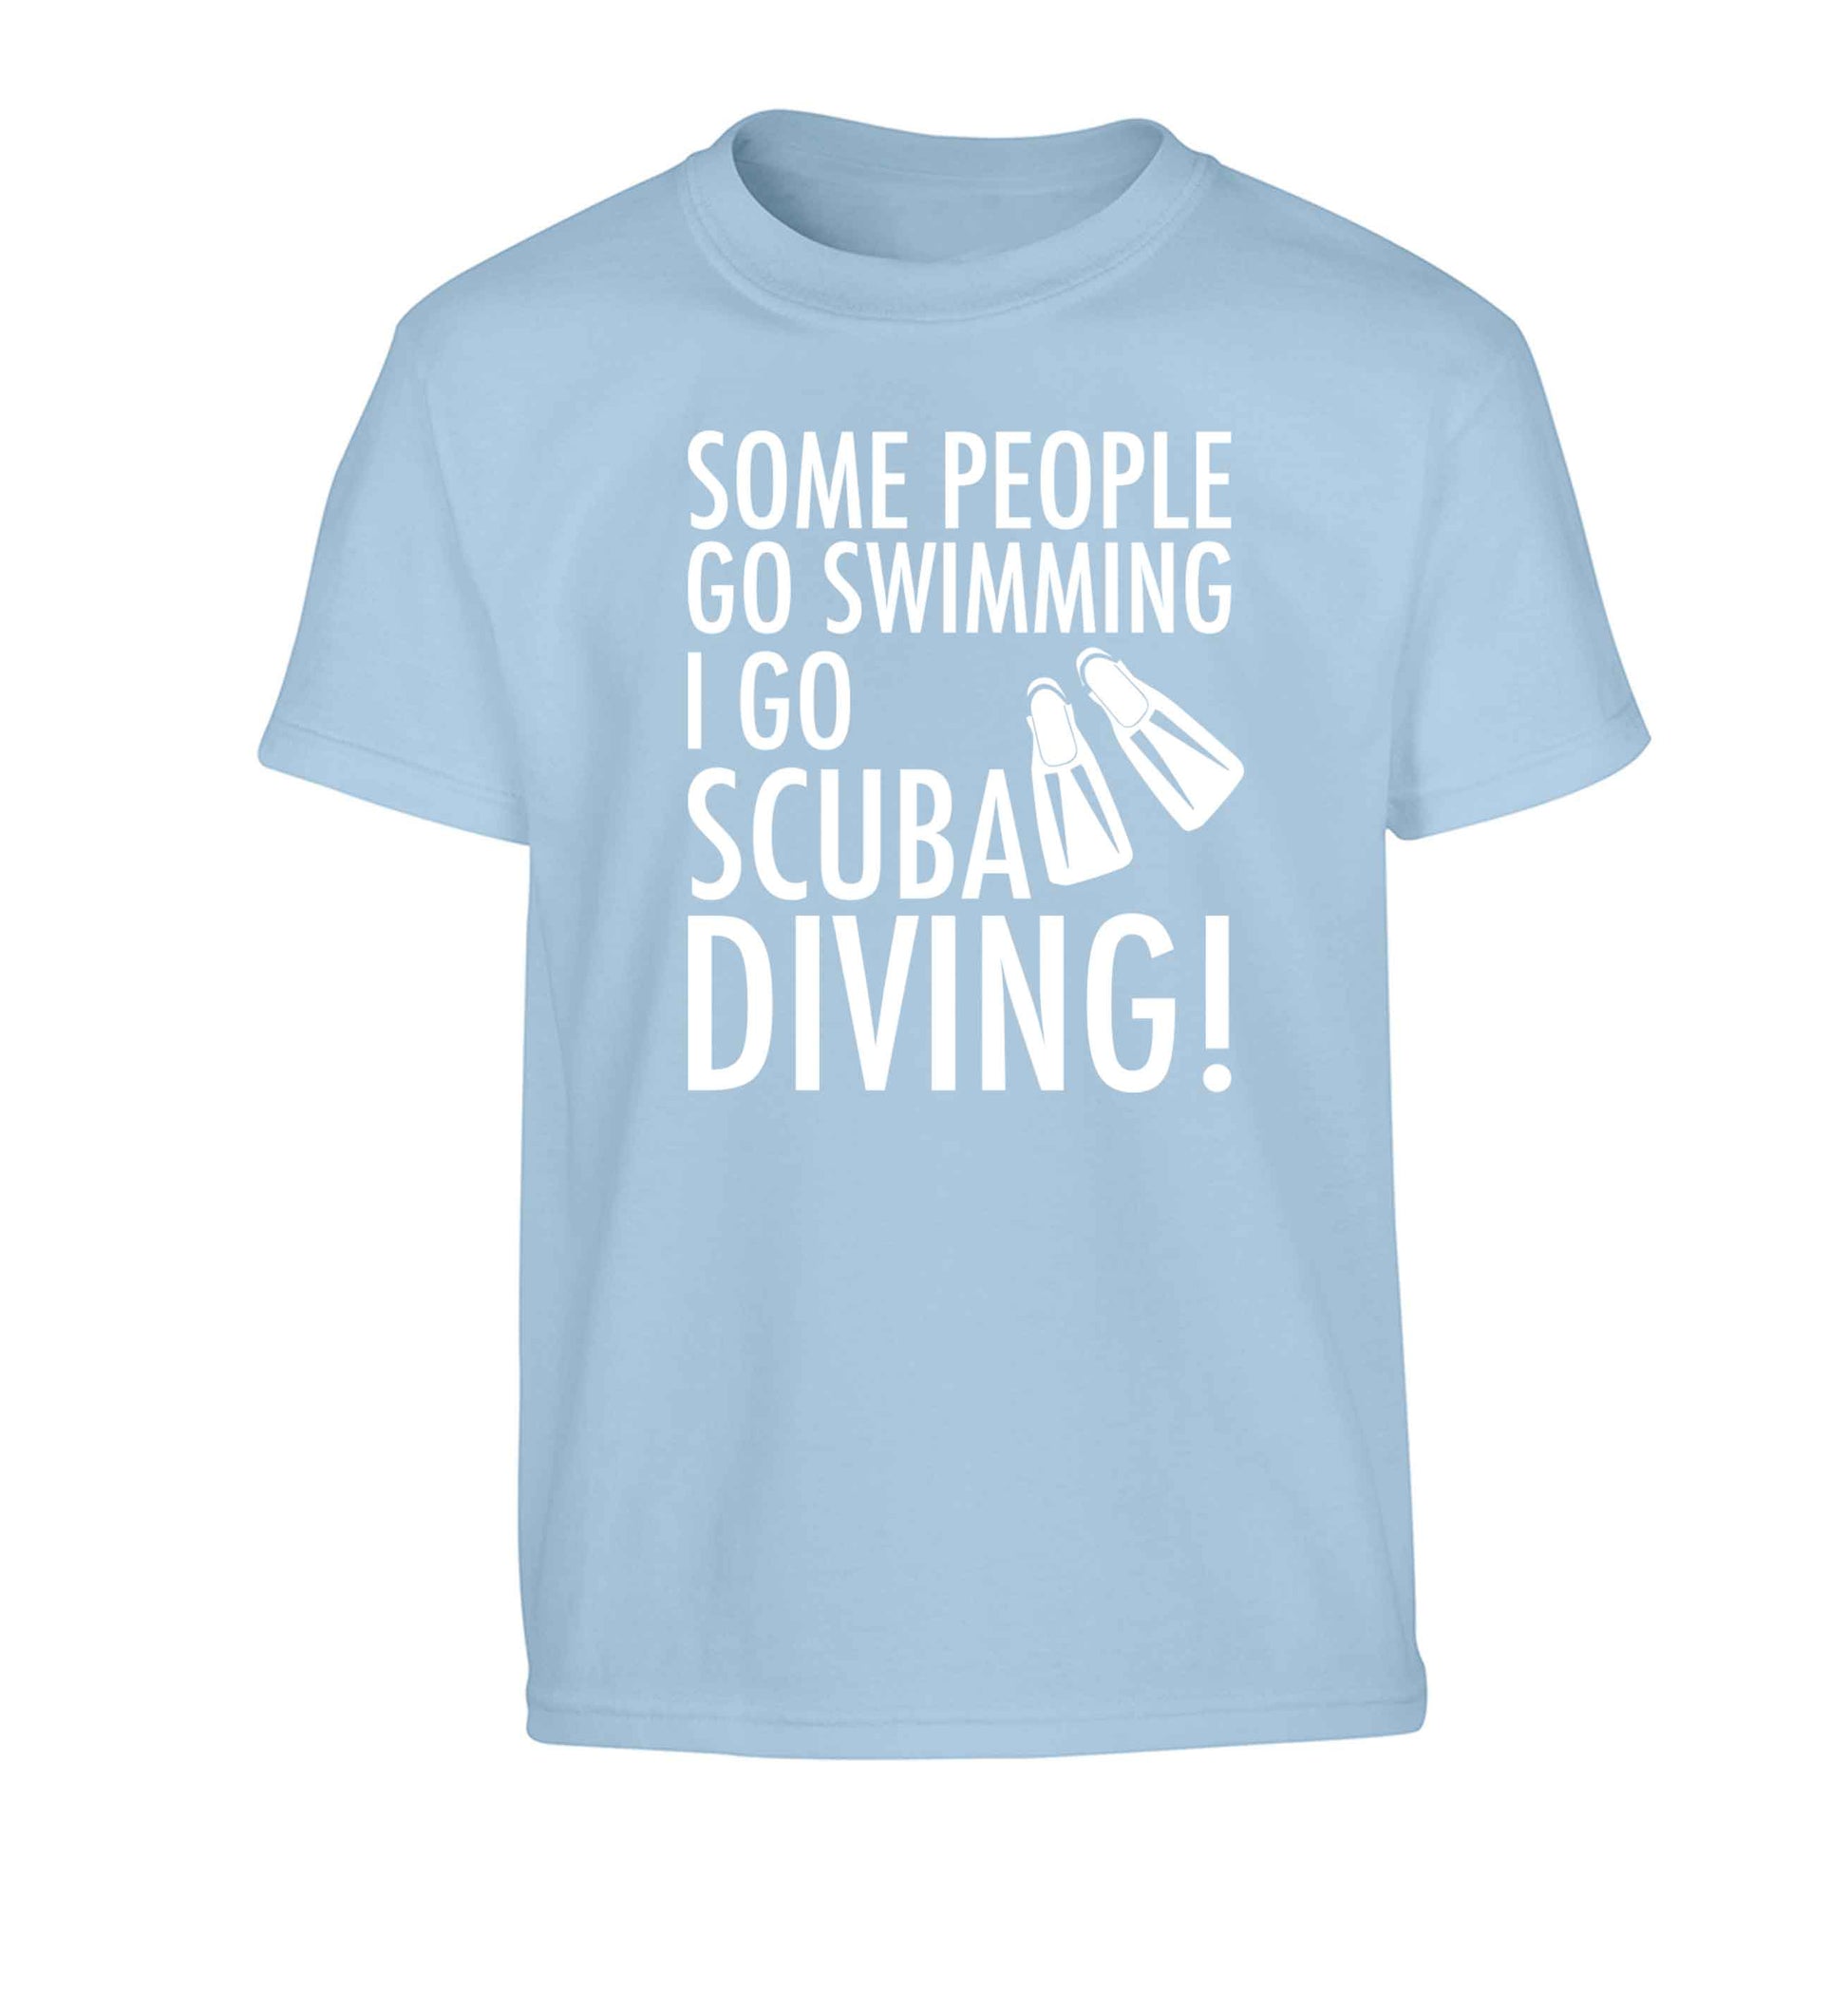 Some people go swimming I go scuba diving! Children's light blue Tshirt 12-13 Years